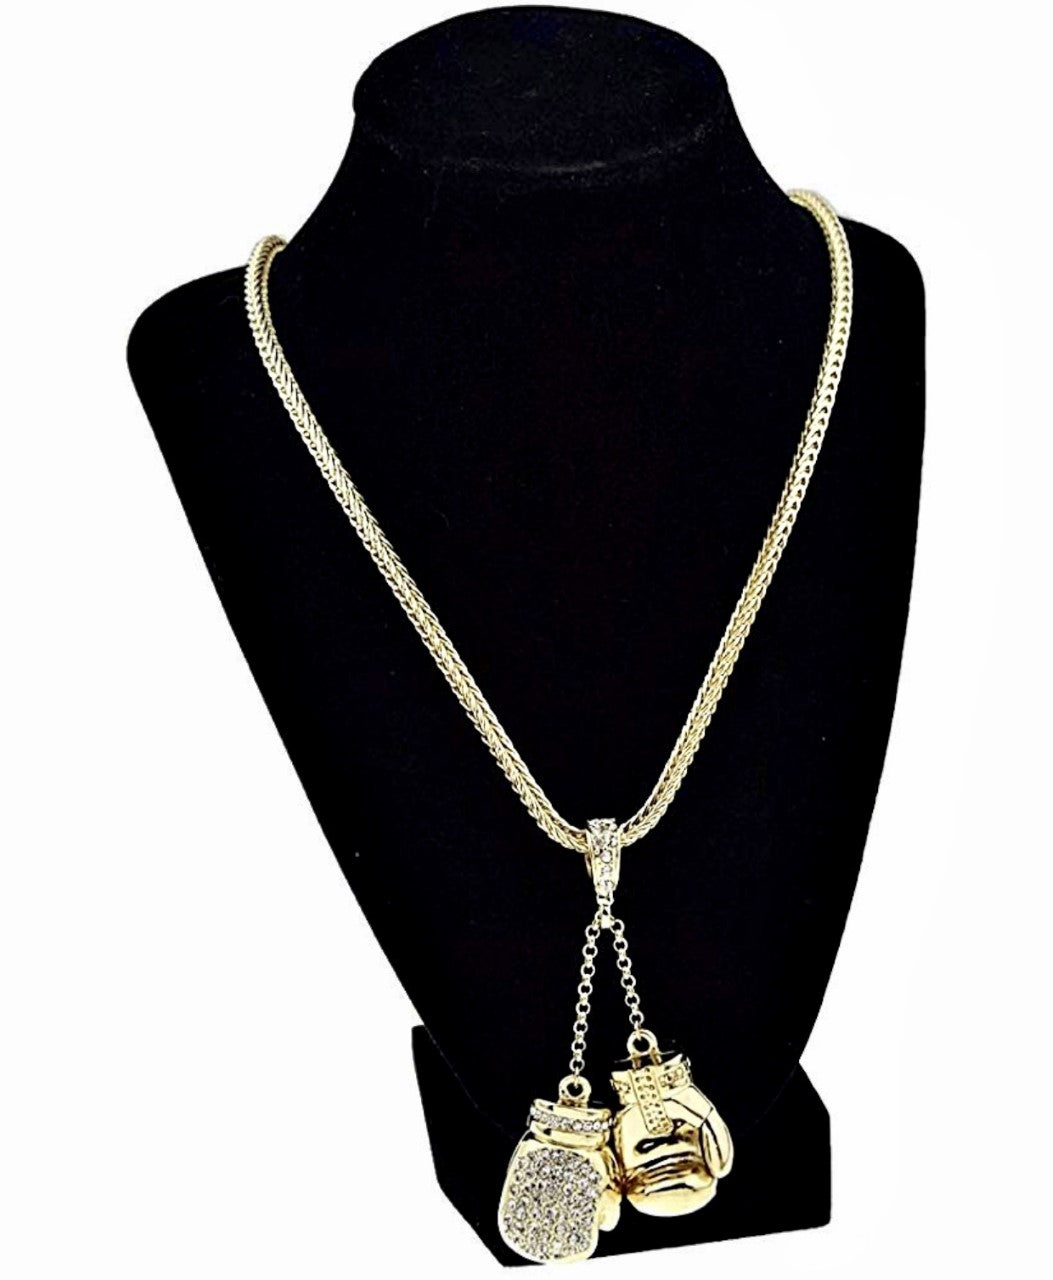 Buy Gold Boxing Gloves Necklace Golden Pair of Boxing Gloves Charm Pendant  Necklace Necklace for Boxers Fighter Boxing Sports Fan Gift Online in India  - Etsy